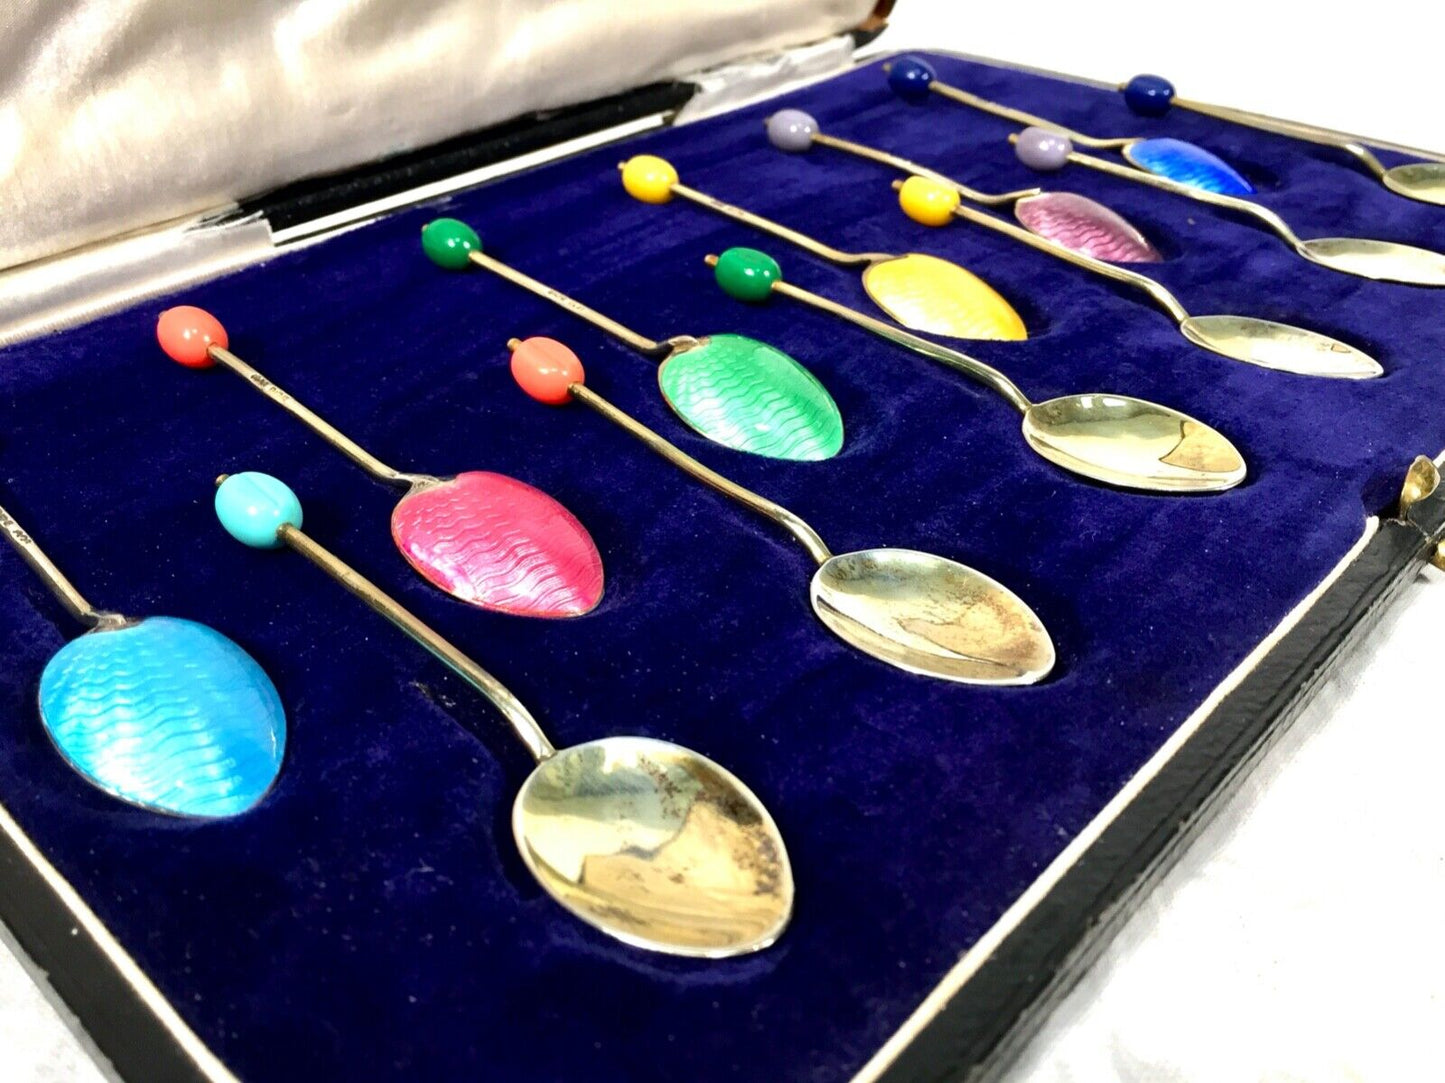 Antique Sterling Silver & Enamel Spoon set by Turner & Simpson Boxed / Art Deco